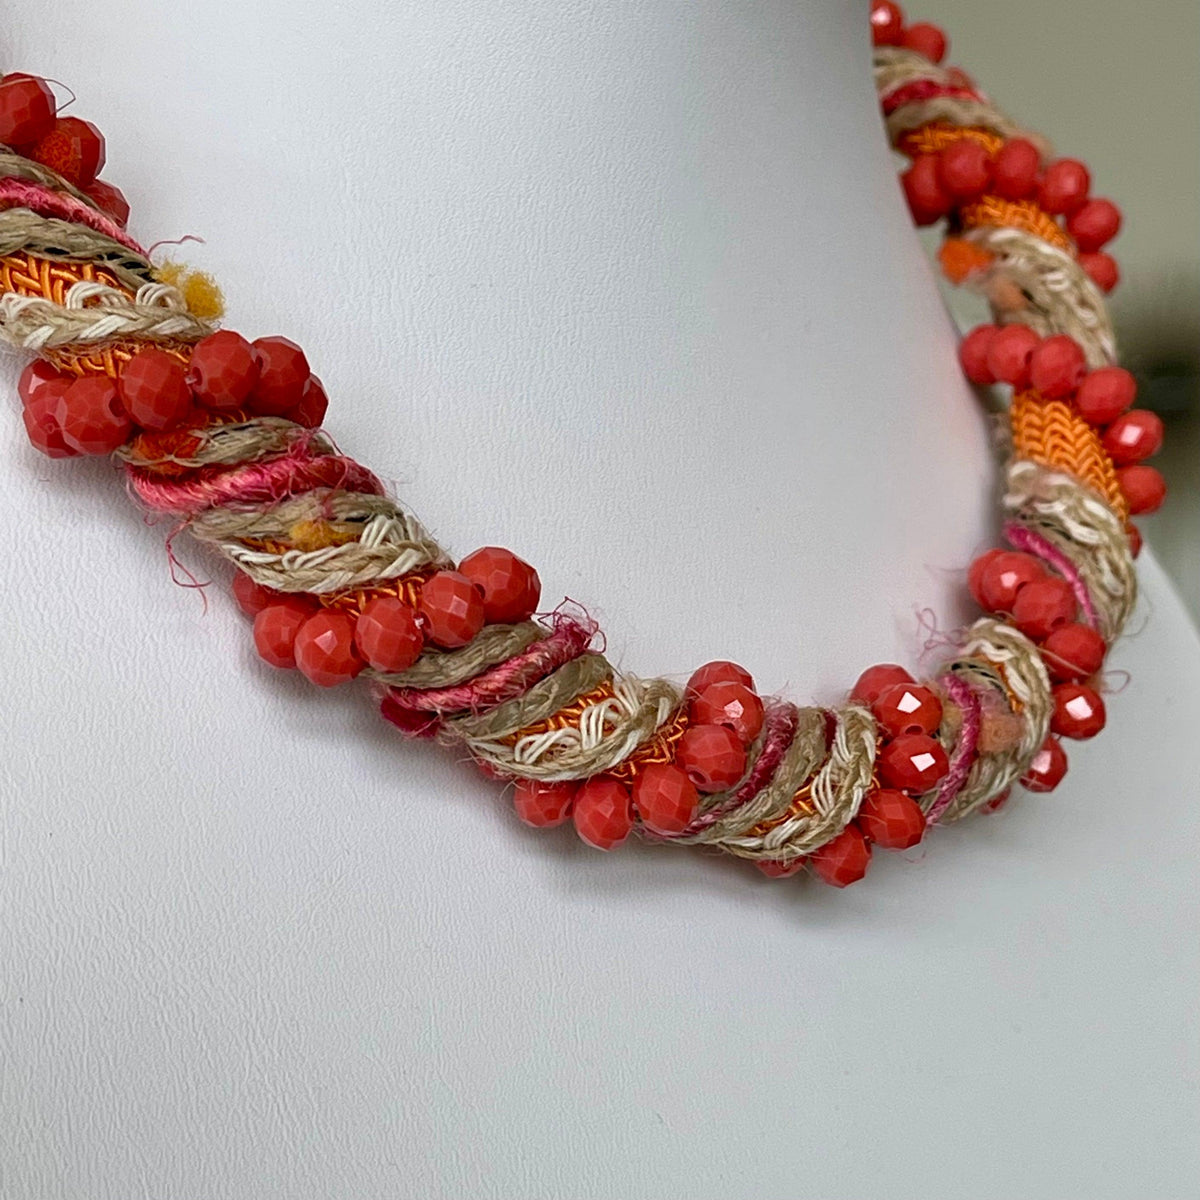 Coral Beads and Lace Necklace - Vita Isola